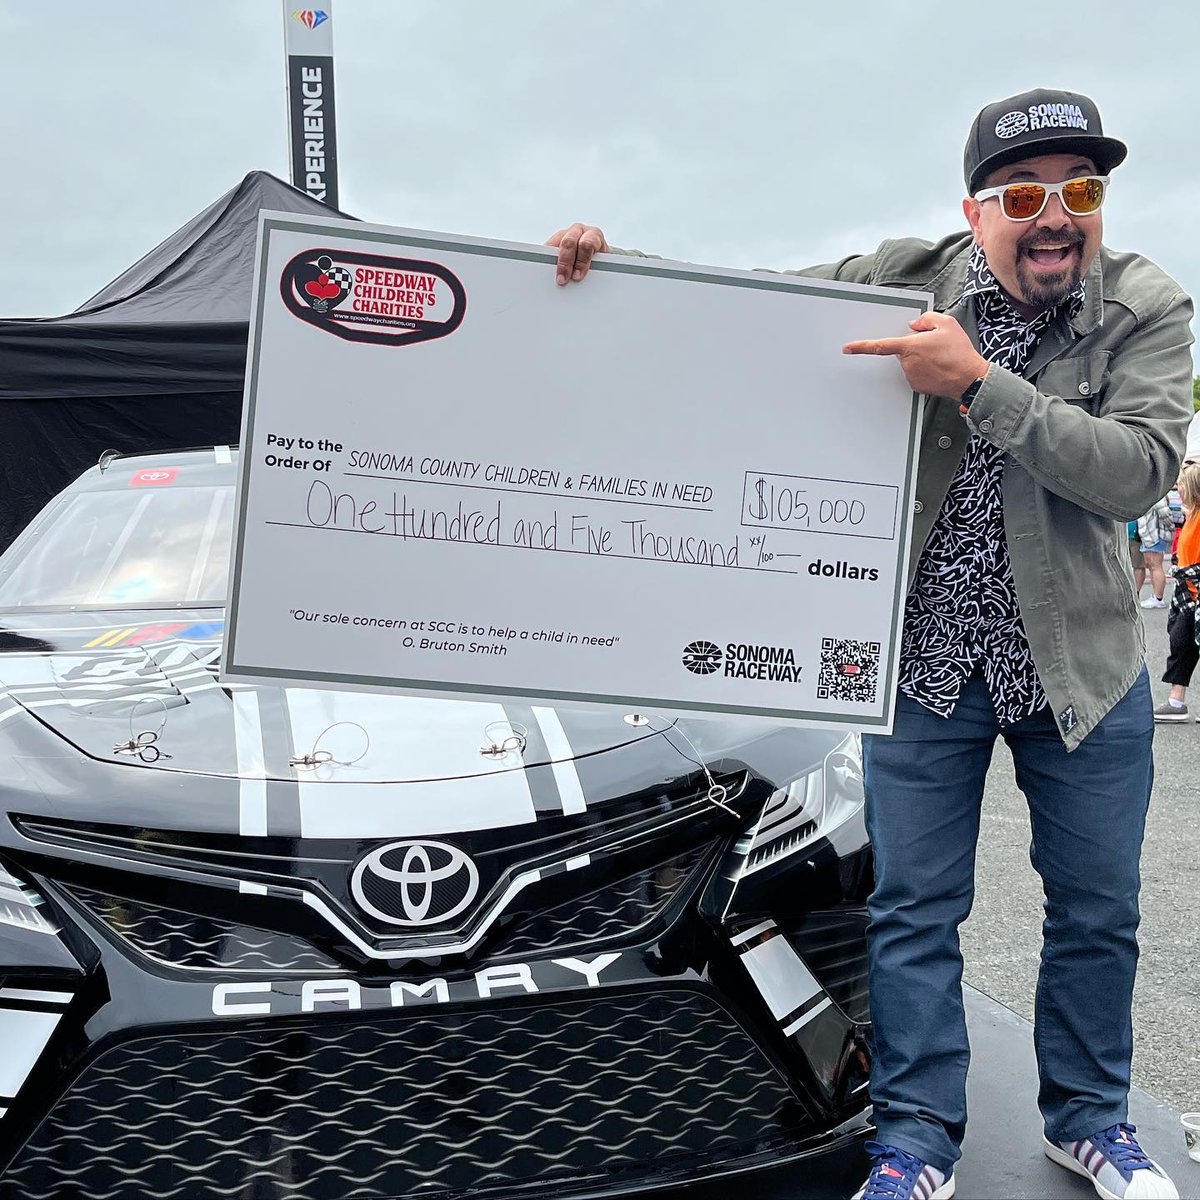 We're looking back on an AWESOME #ToyotaSaveMart350 race weekend! Thanks to everyone for their support in our work to help children in need! 

You can still help... visit SpeedwayCharities.org and make a donation today!

#KidsWin // @RaceSonoma